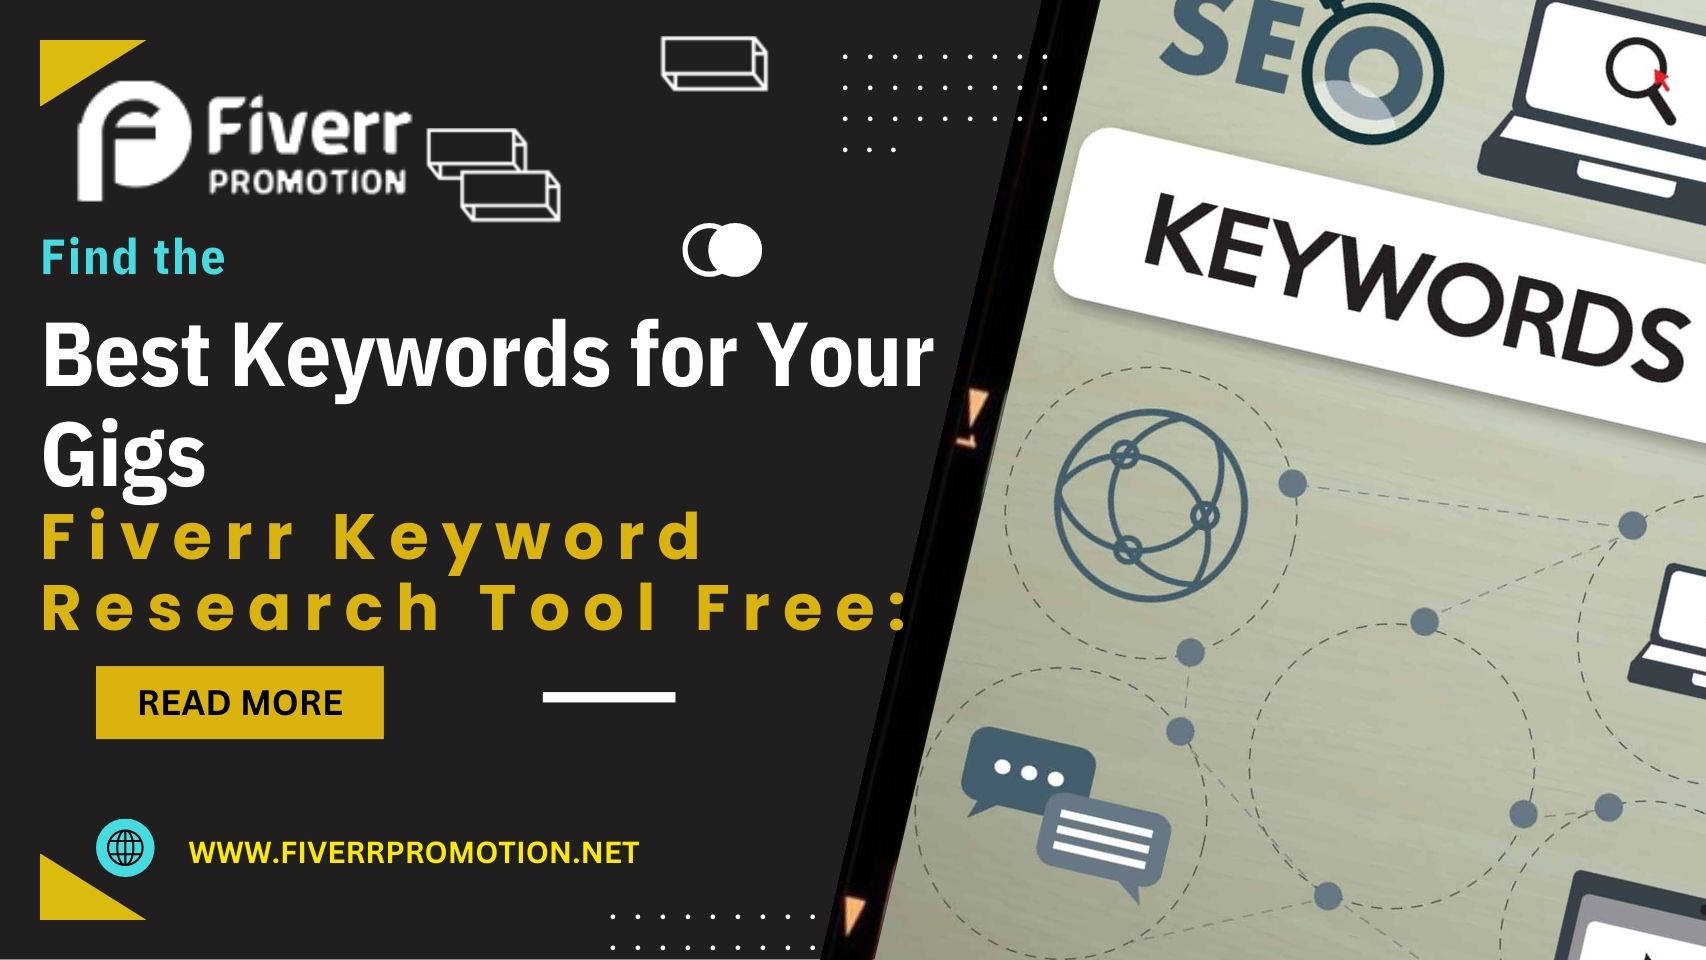 Fiverr Keyword Research Tool Free: Find the Best Keywords for Your Gigs